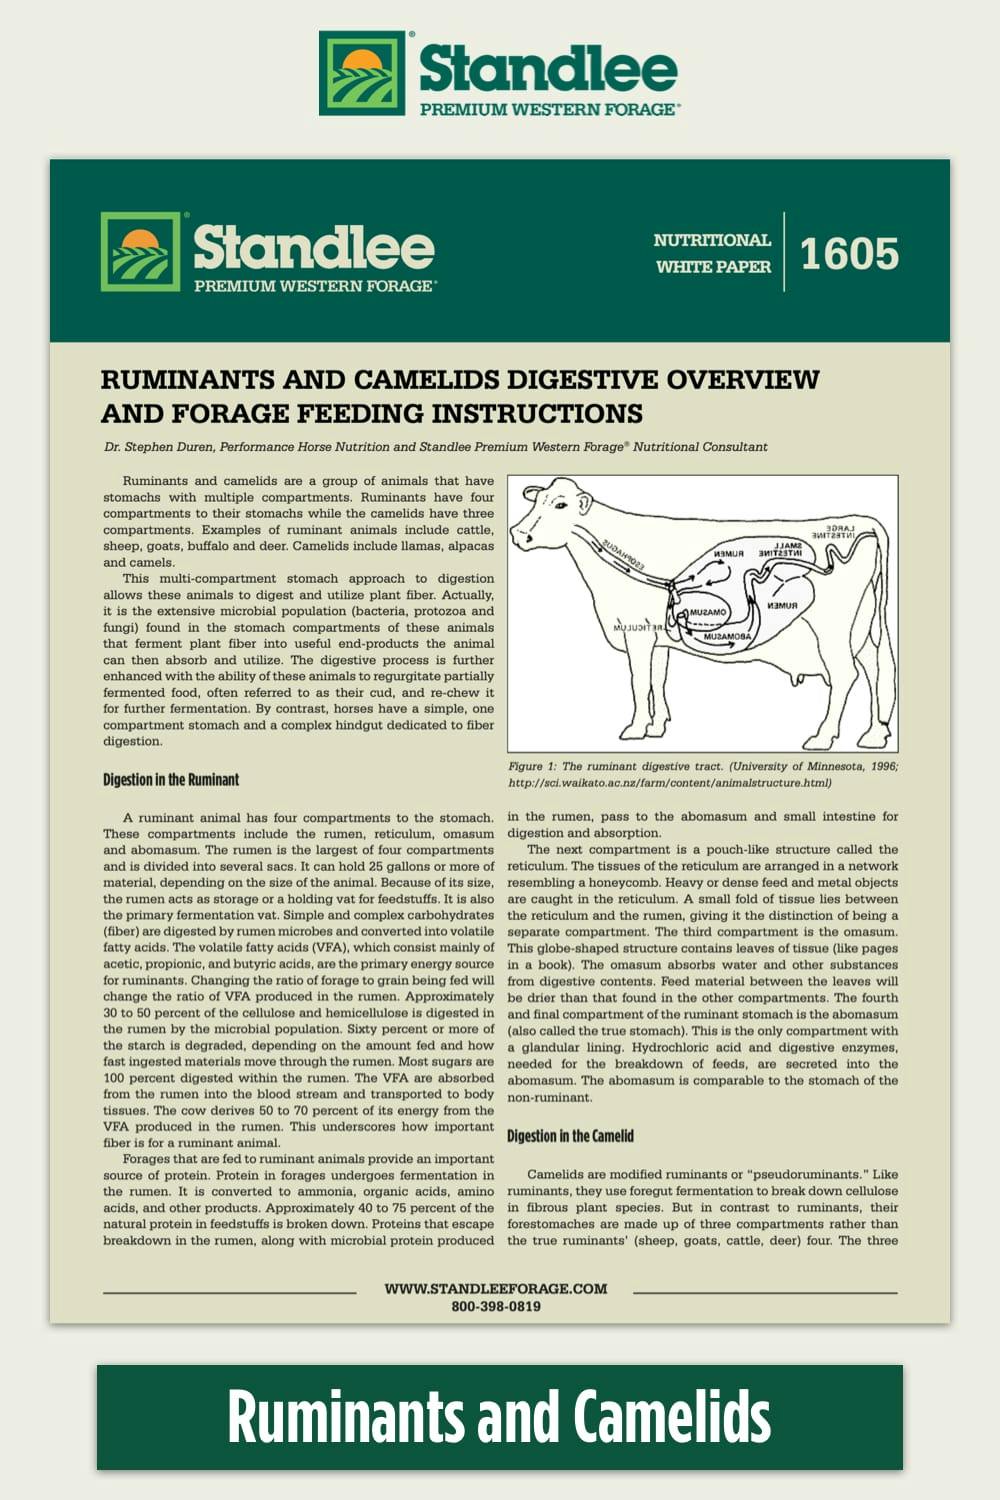 Ruminants & Camelids Digestive Overview, Feeding Instruction